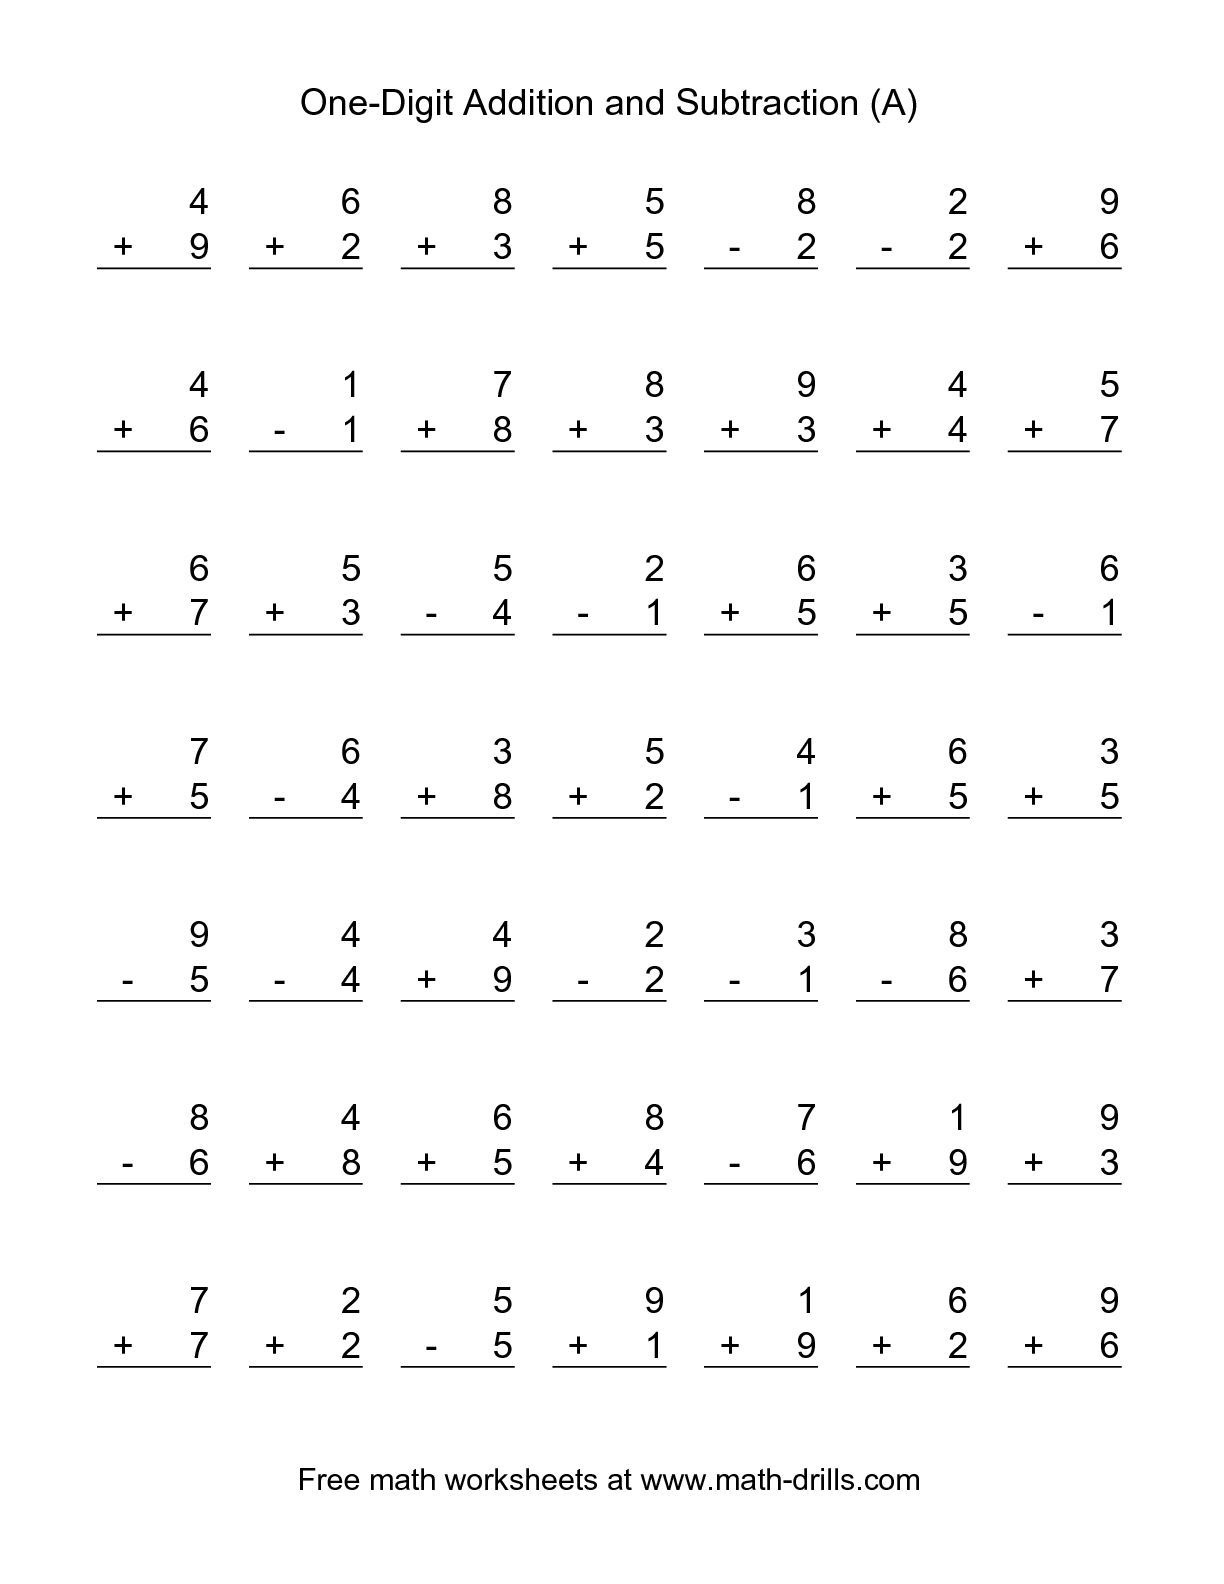 The Single-Digit (A) Math Worksheet From The Combined Addition And - Free Printable Mixed Addition And Subtraction Worksheets